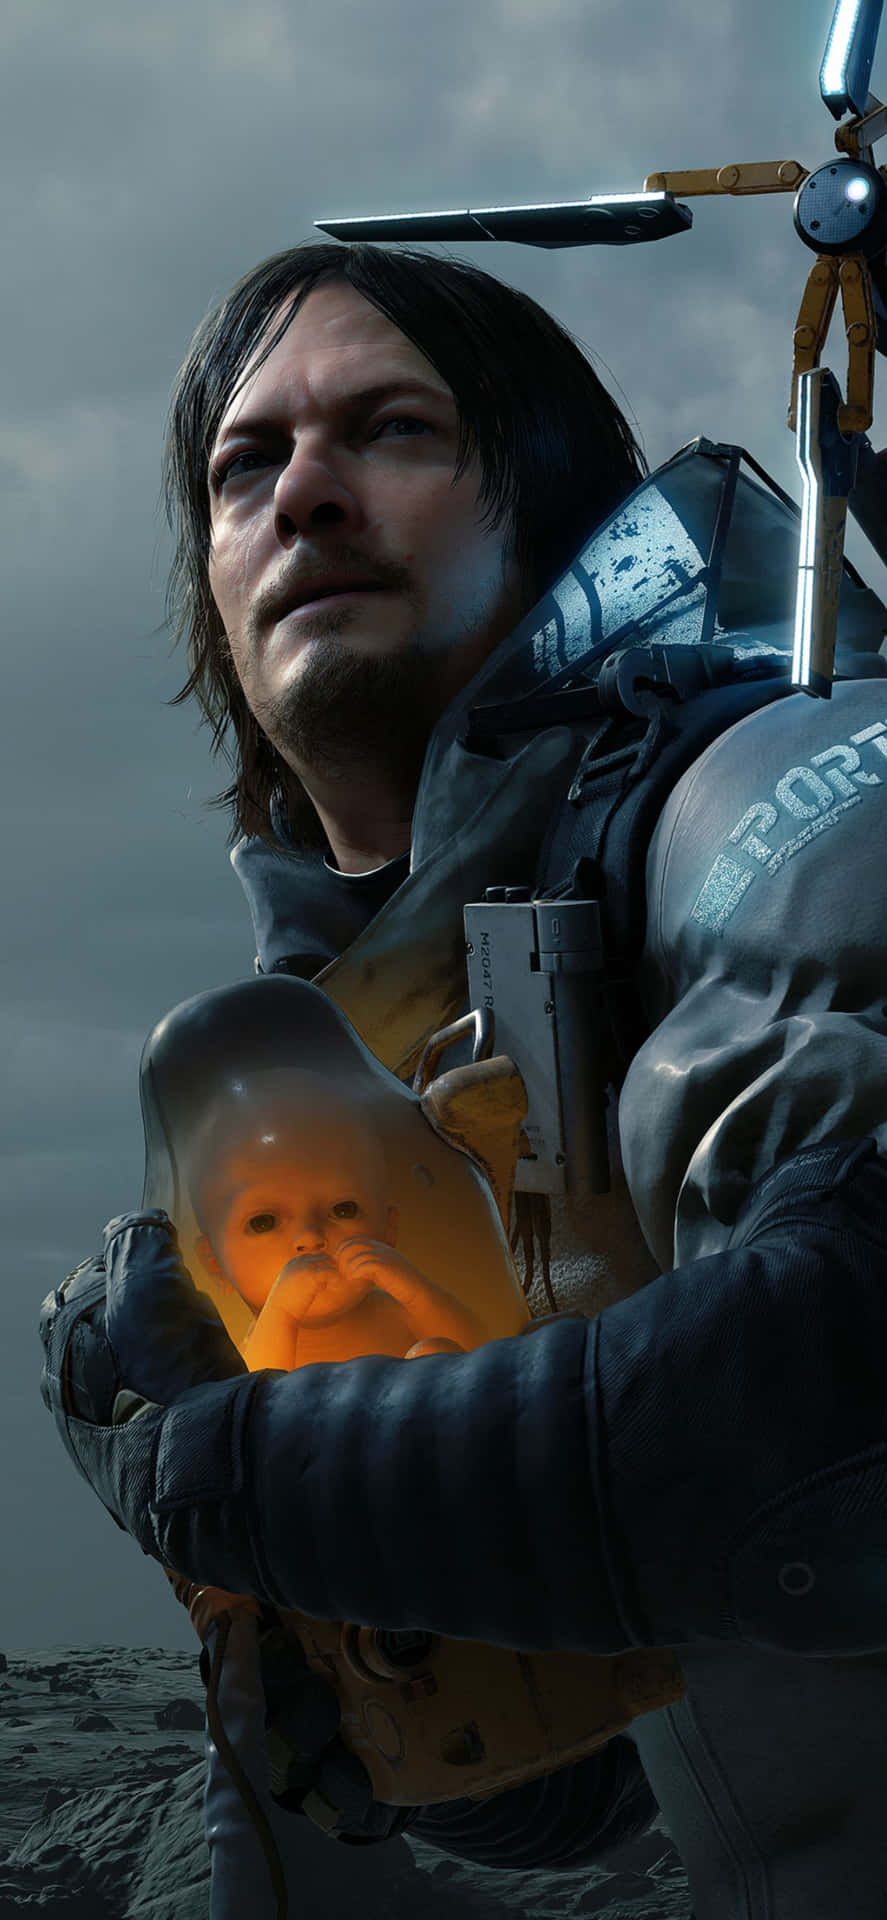 Get Ready To Play The Highly Anticipated Video Game: Death Stranding On Your Iphone Xs Max